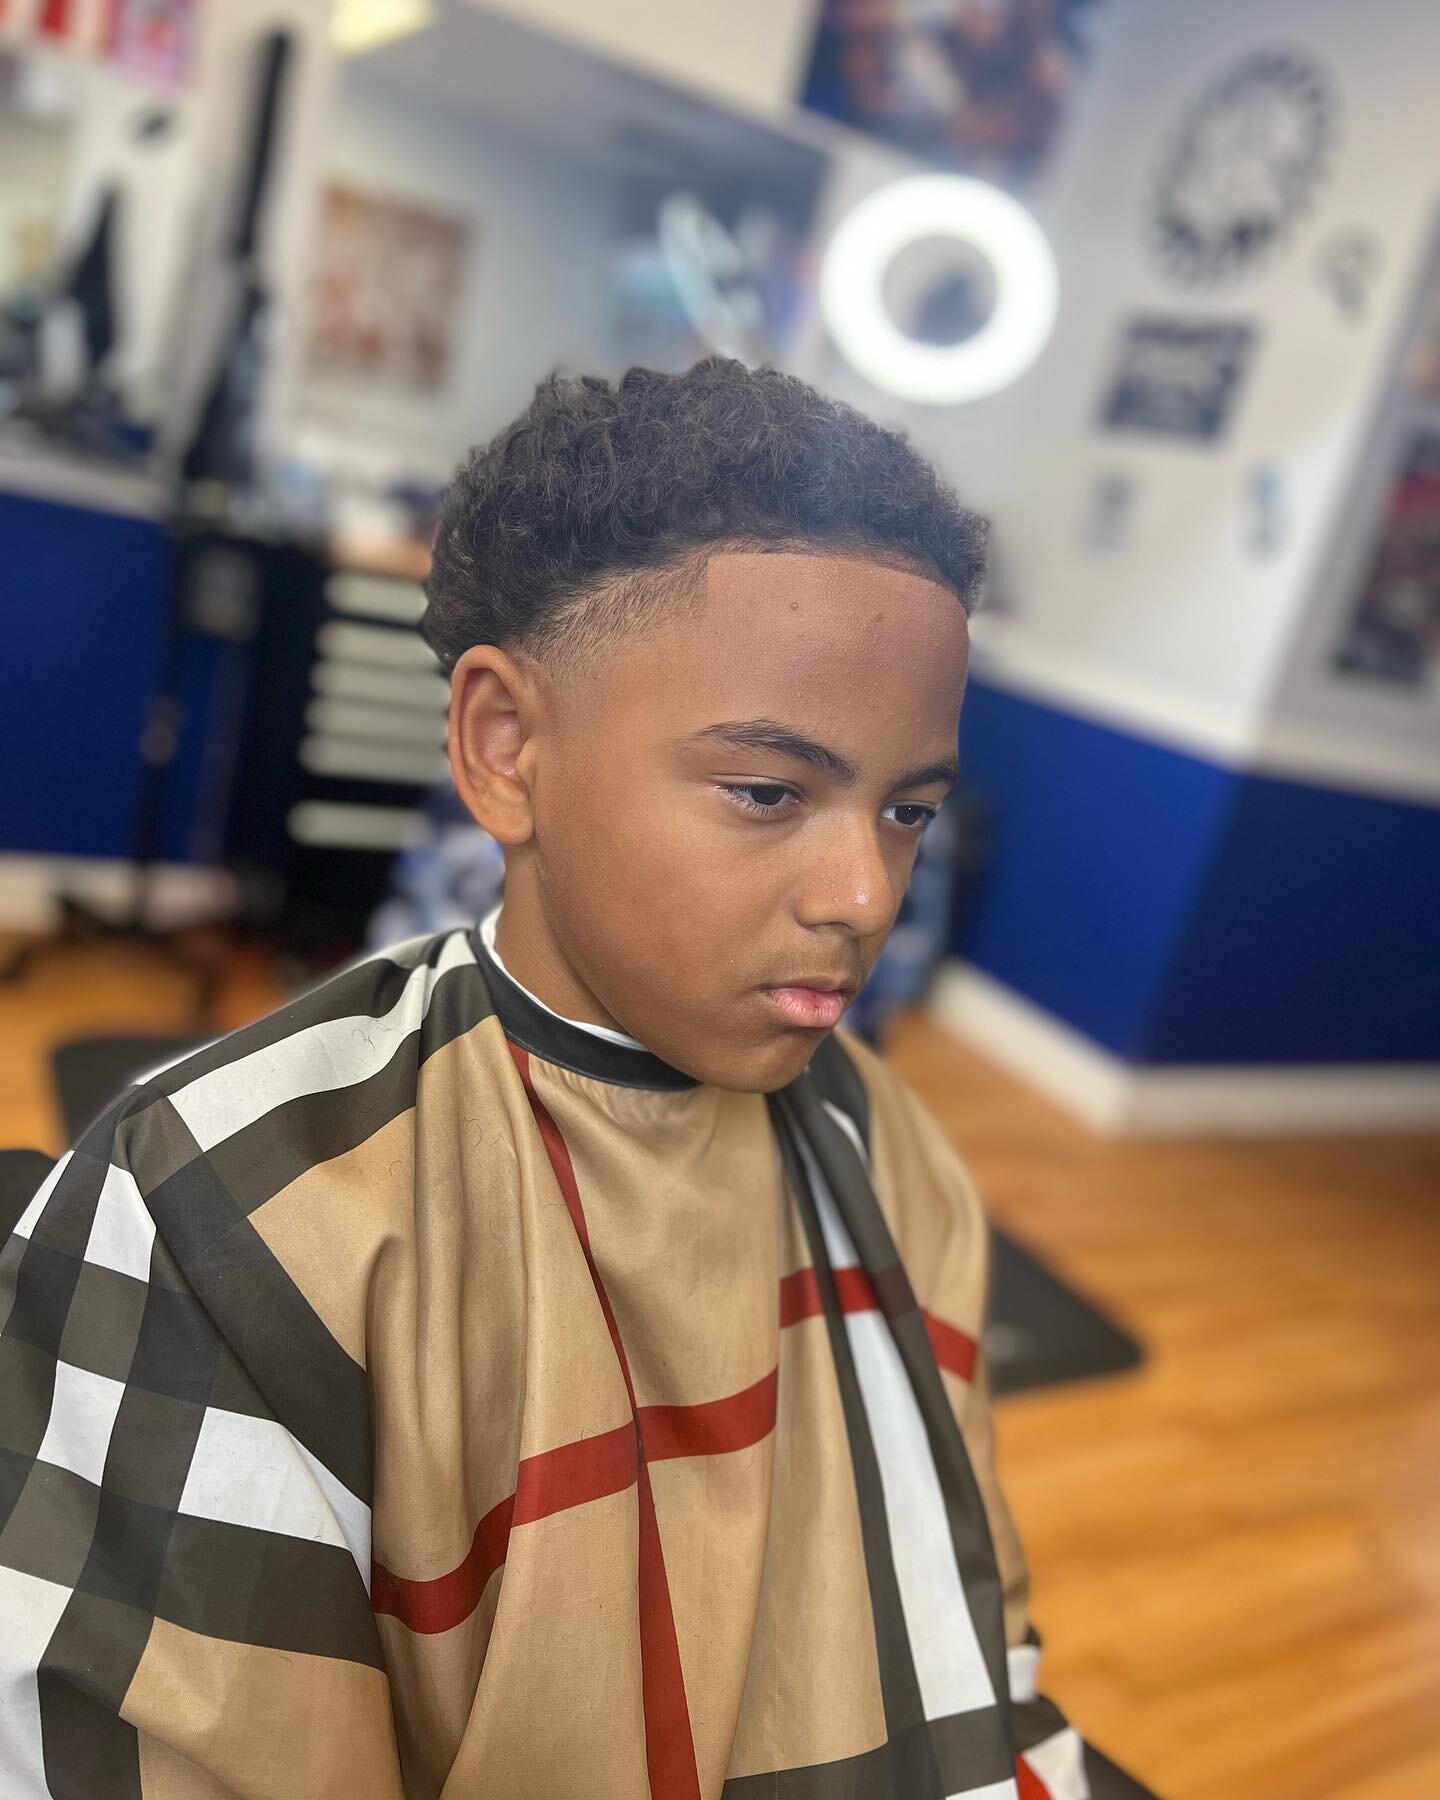 ⚓️ Elz&bull;DaBarber 💈
Walk Ins Welcome / Appointments 🗓
188 Taunton Ave East Prov #401-632-0283